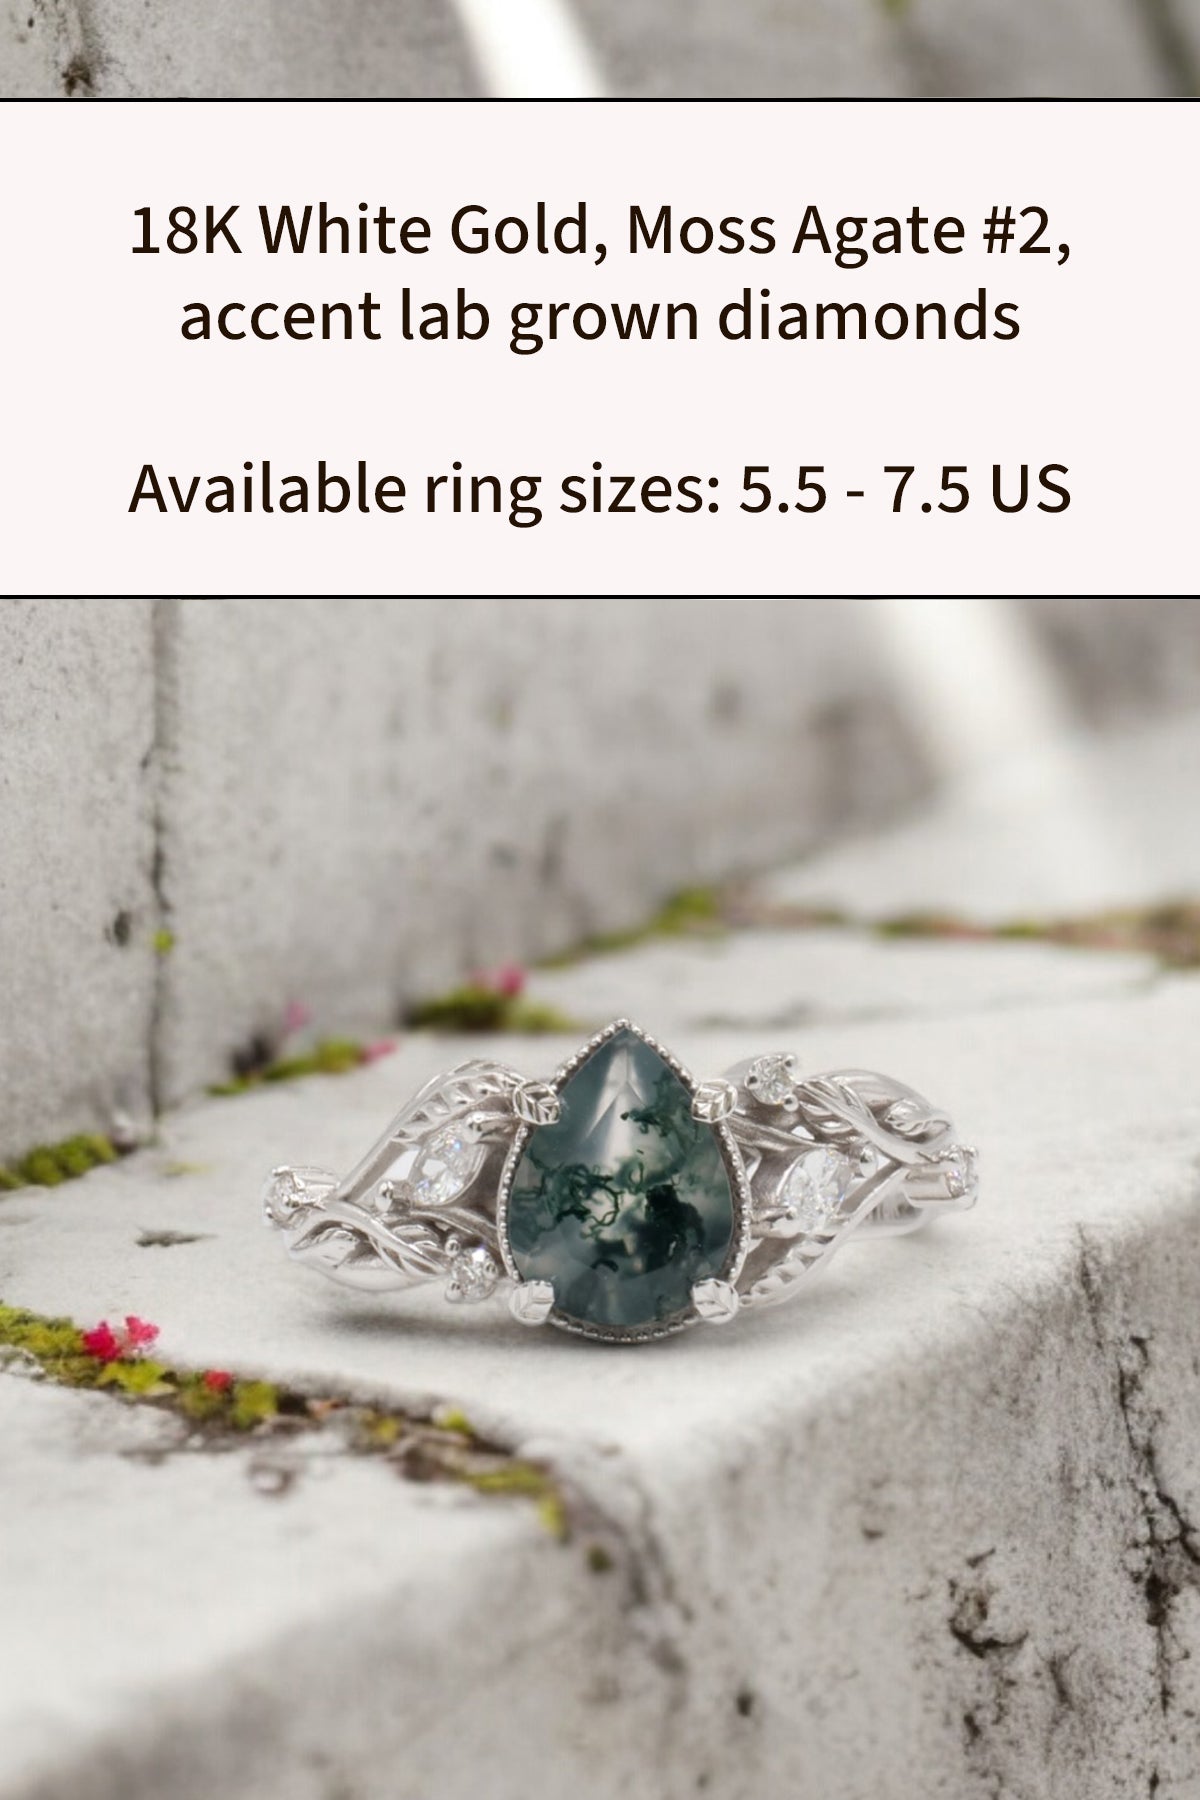 READY TO SHIP: Patricia ring in 18K white gold, natural moss agate pear cut 8x6 mm, accent lab grown diamonds, AVAILABLE RING SIZES: 5.5-10 US